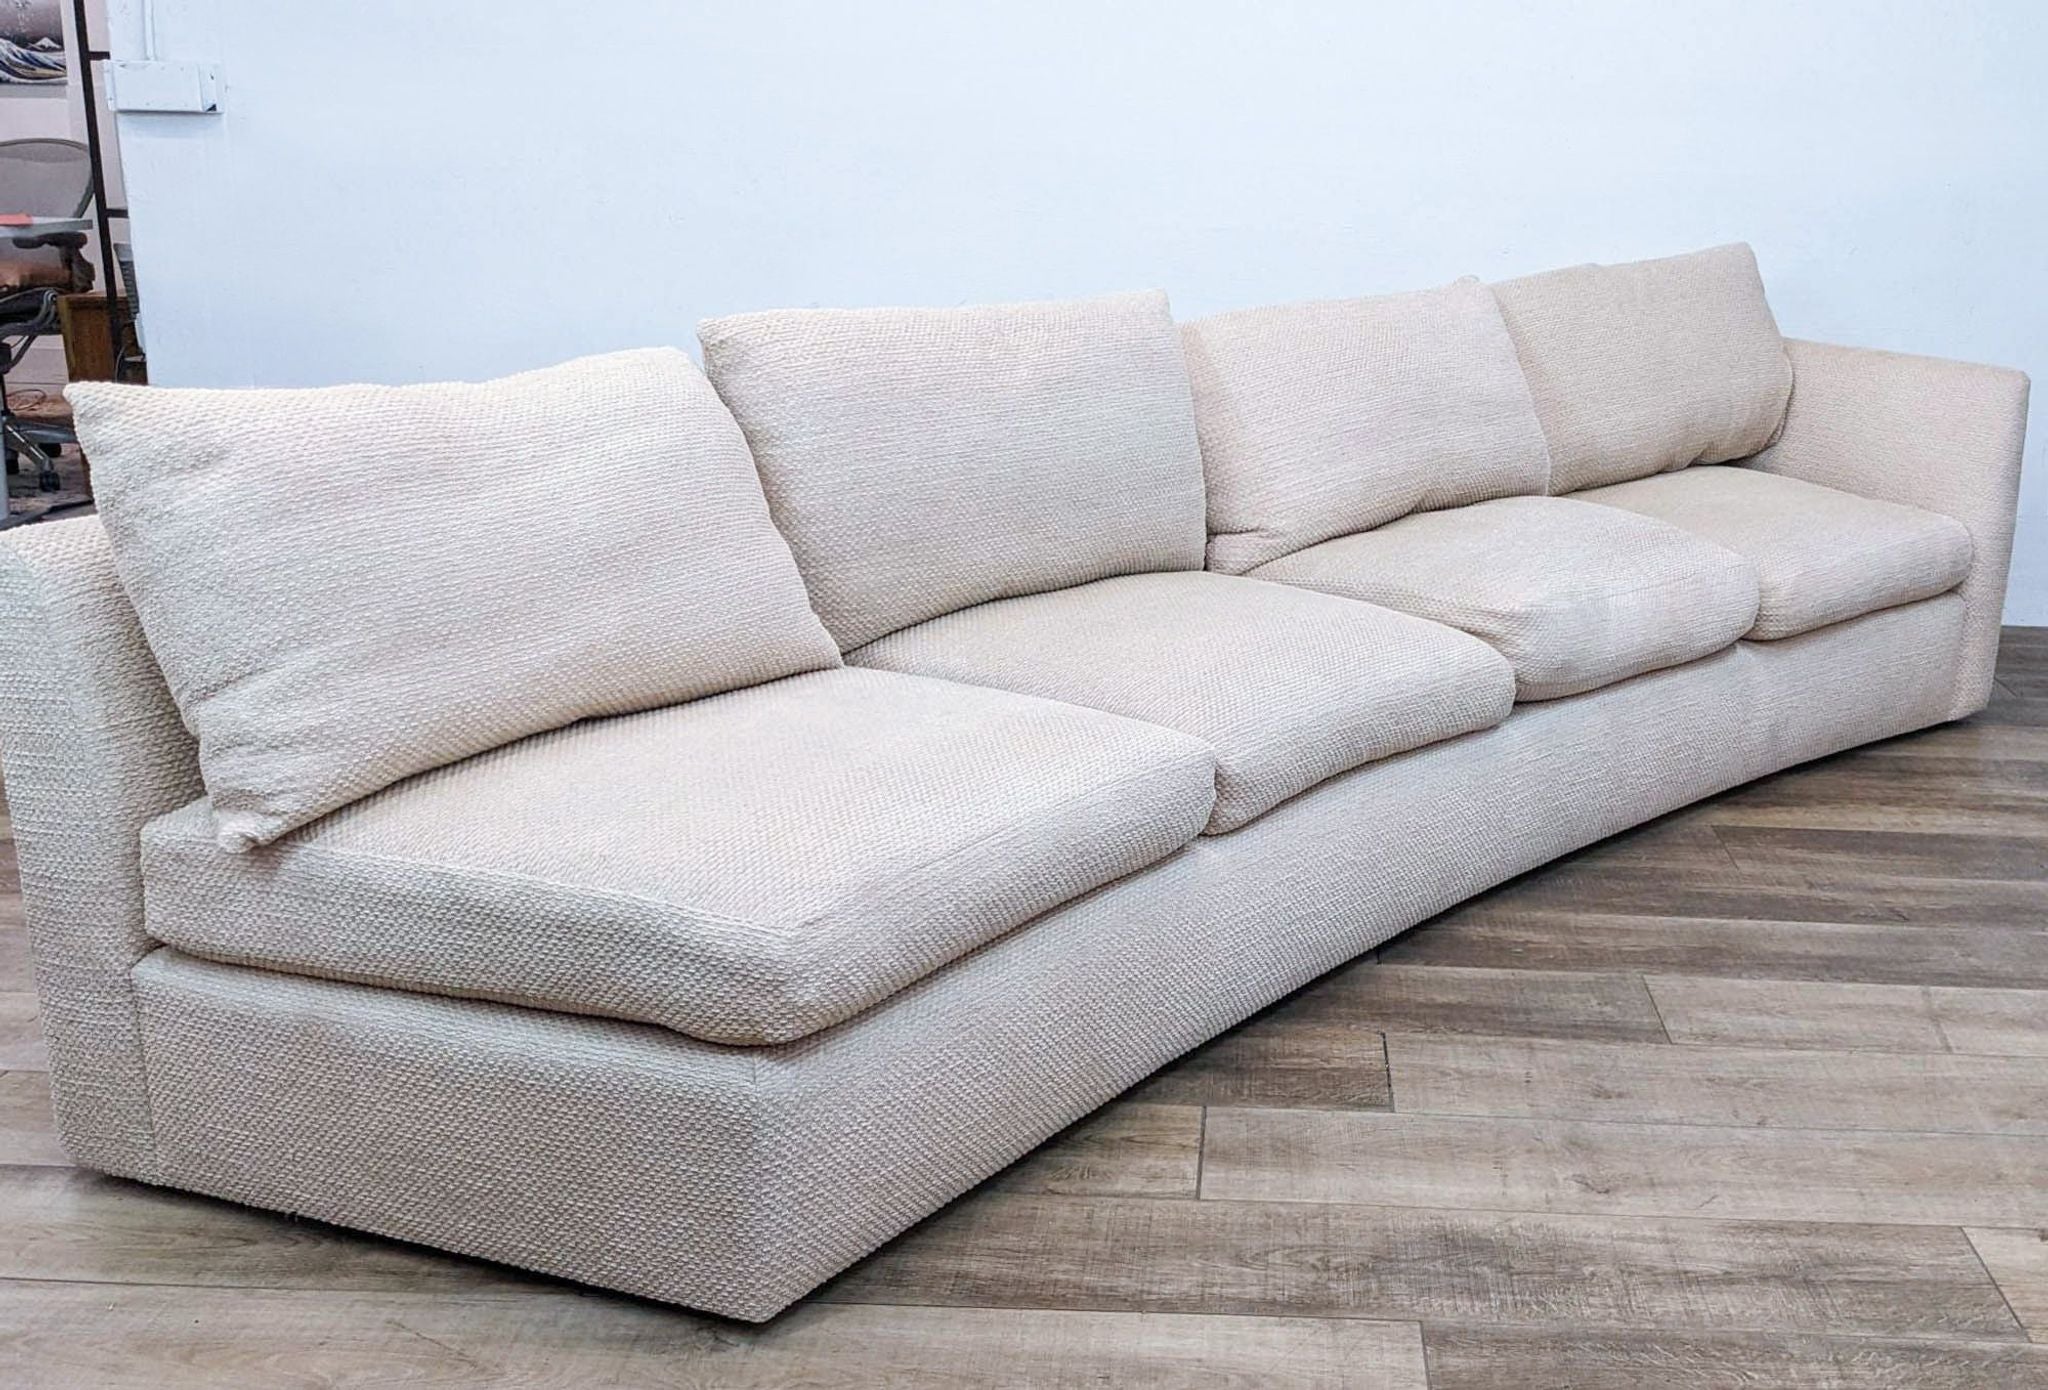 Beige one-piece sectional with unique curved design by Reperch, angled view showcasing shape.